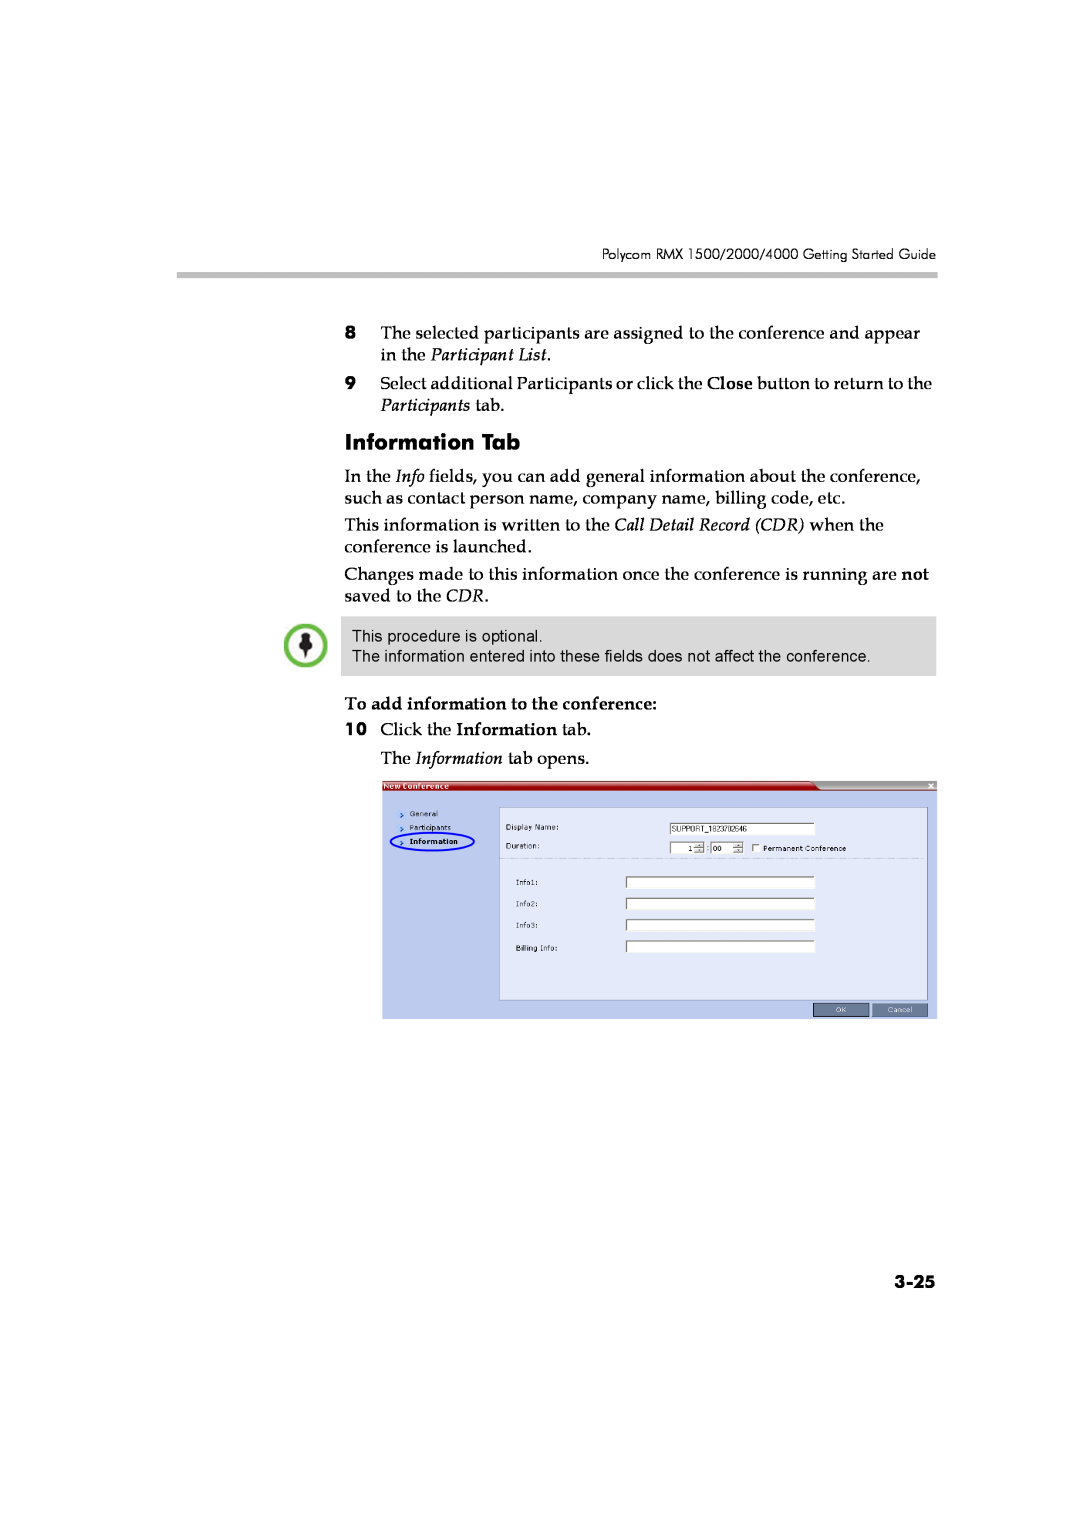 Polycom DOC2560B manual Information Tab, To add information to the conference, 3-25 